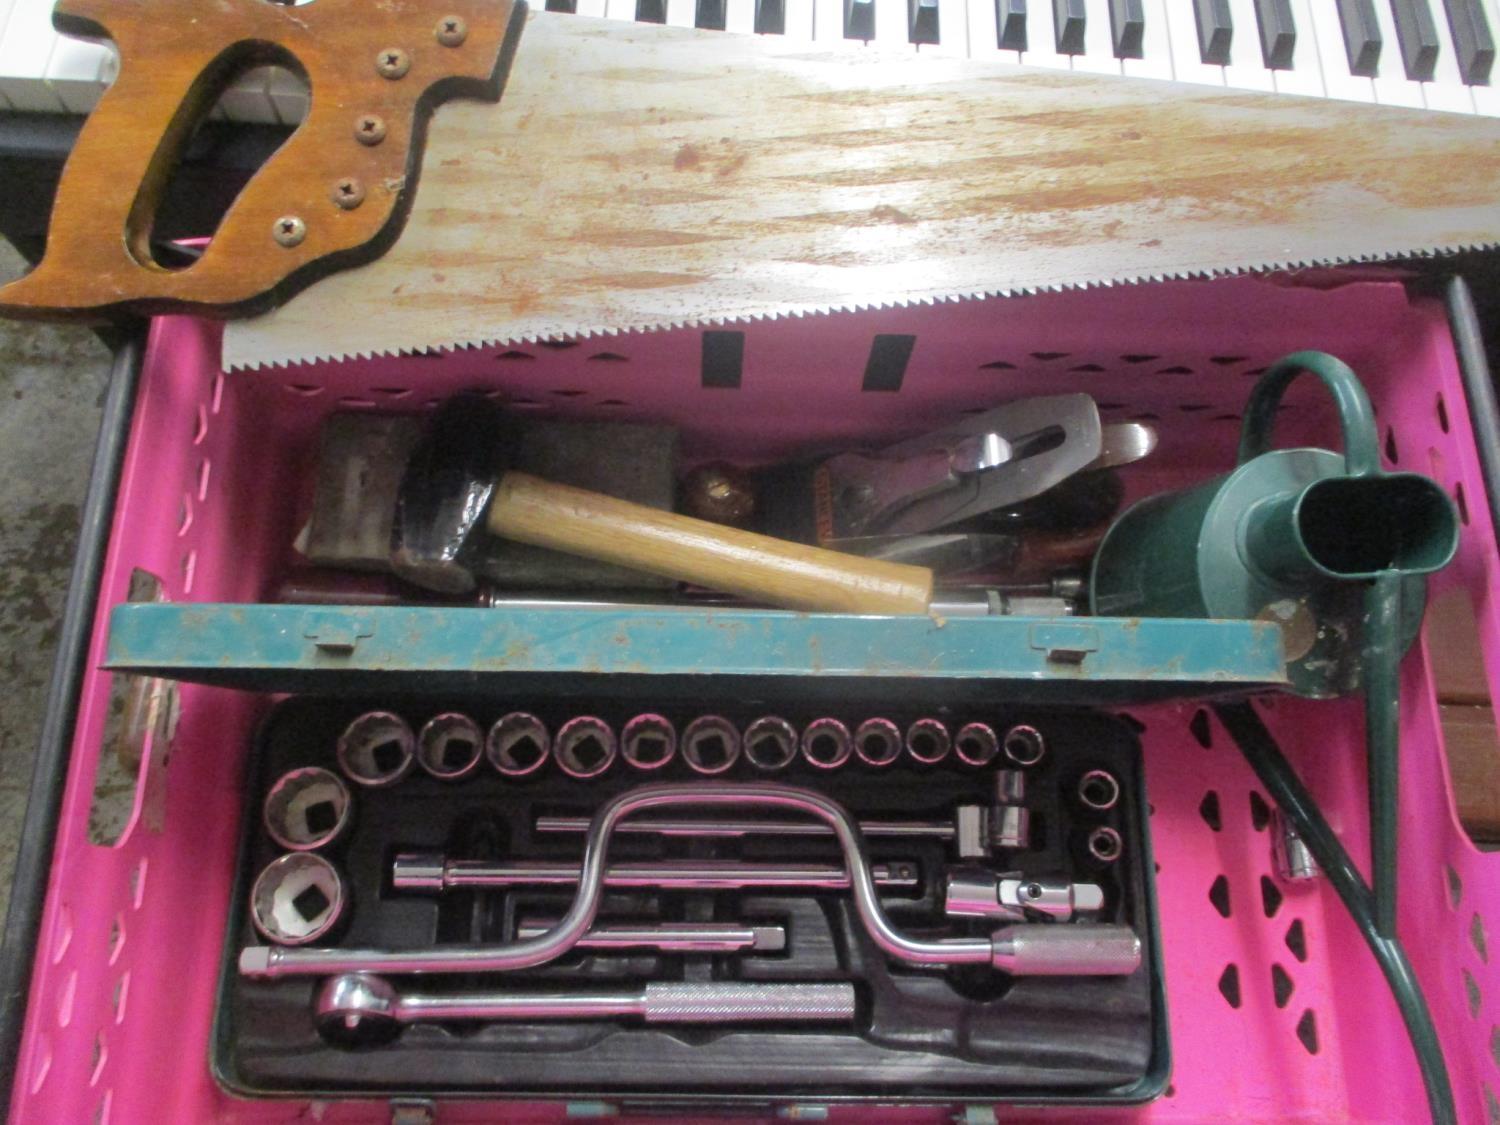 Mixed tools to include a socket set, a saw, a record plane and other items